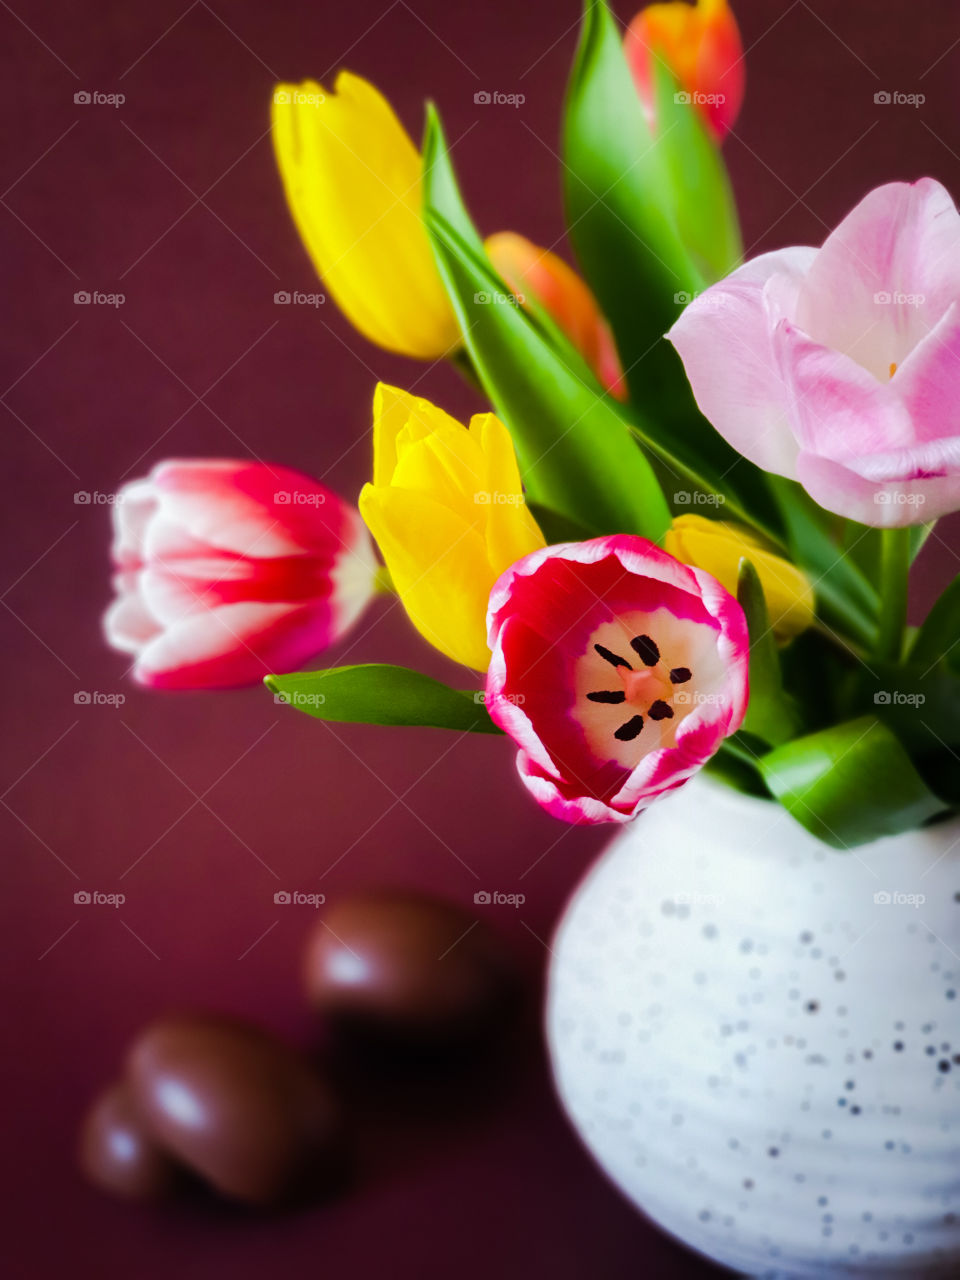 Spring bouquet.  Multi-colored tulips in a white clay jug with chocolate eggs on a brown background.  Easter holidays.  Horizontal orientation